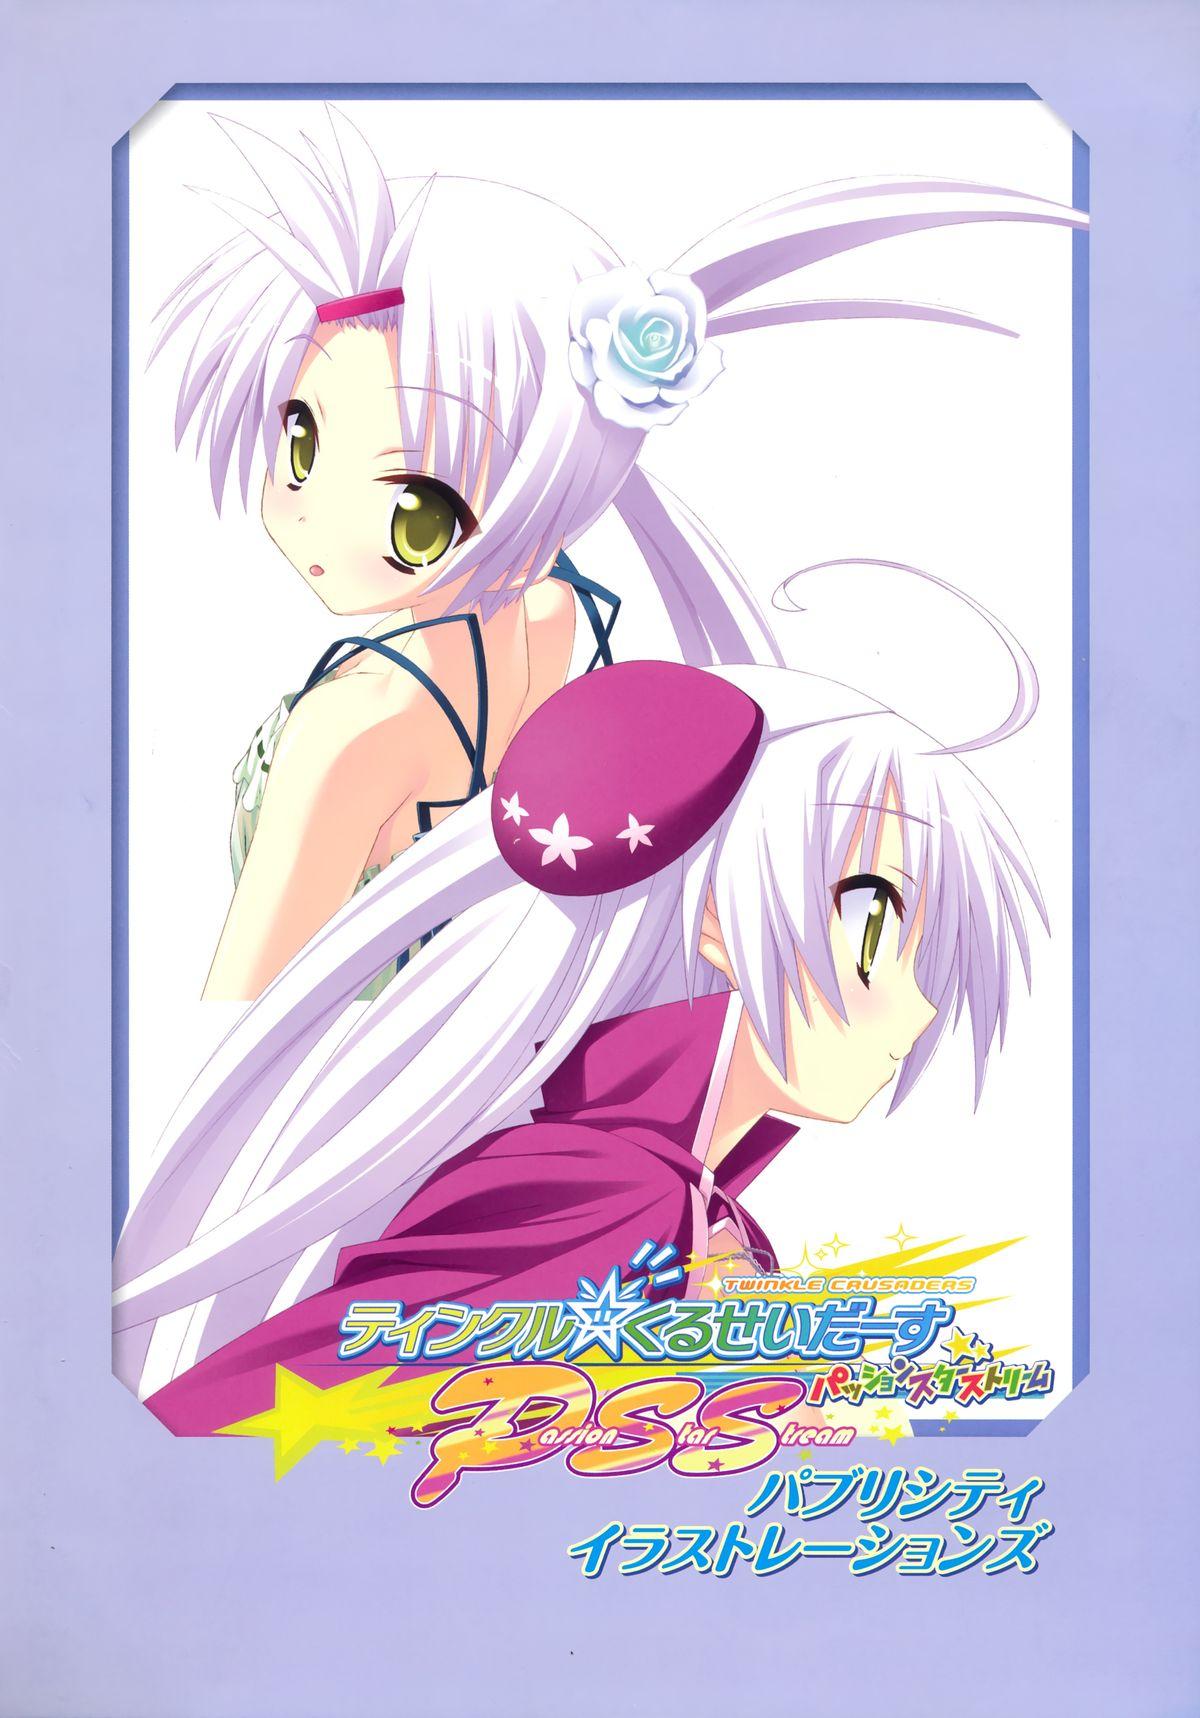 Twinkle Crusaders -Passion Star Stream- Visual Fanbook 0